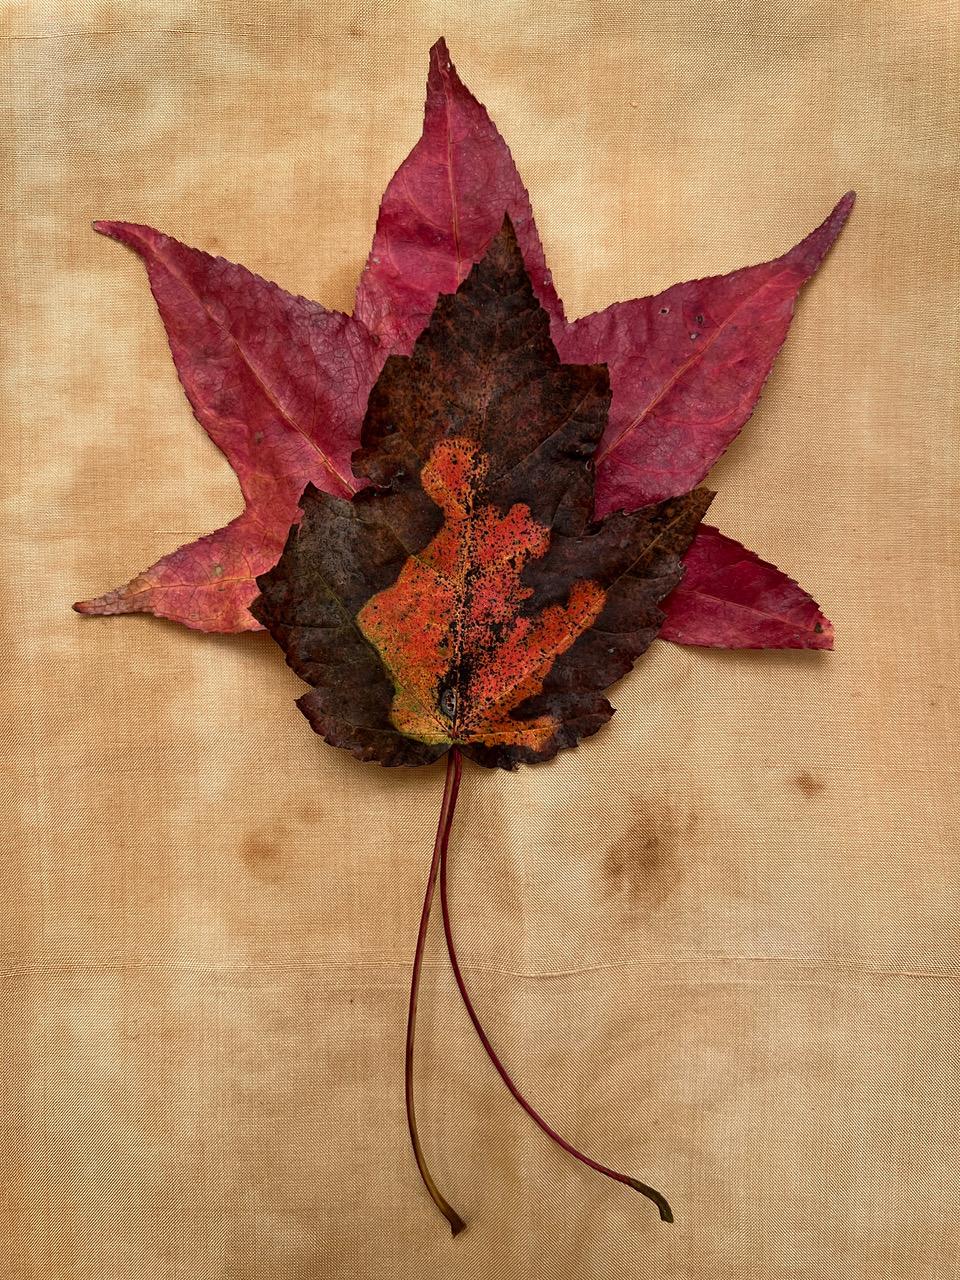 Untitled #3440 from "Leaves" series: nature still-life leaf photograph w/ red